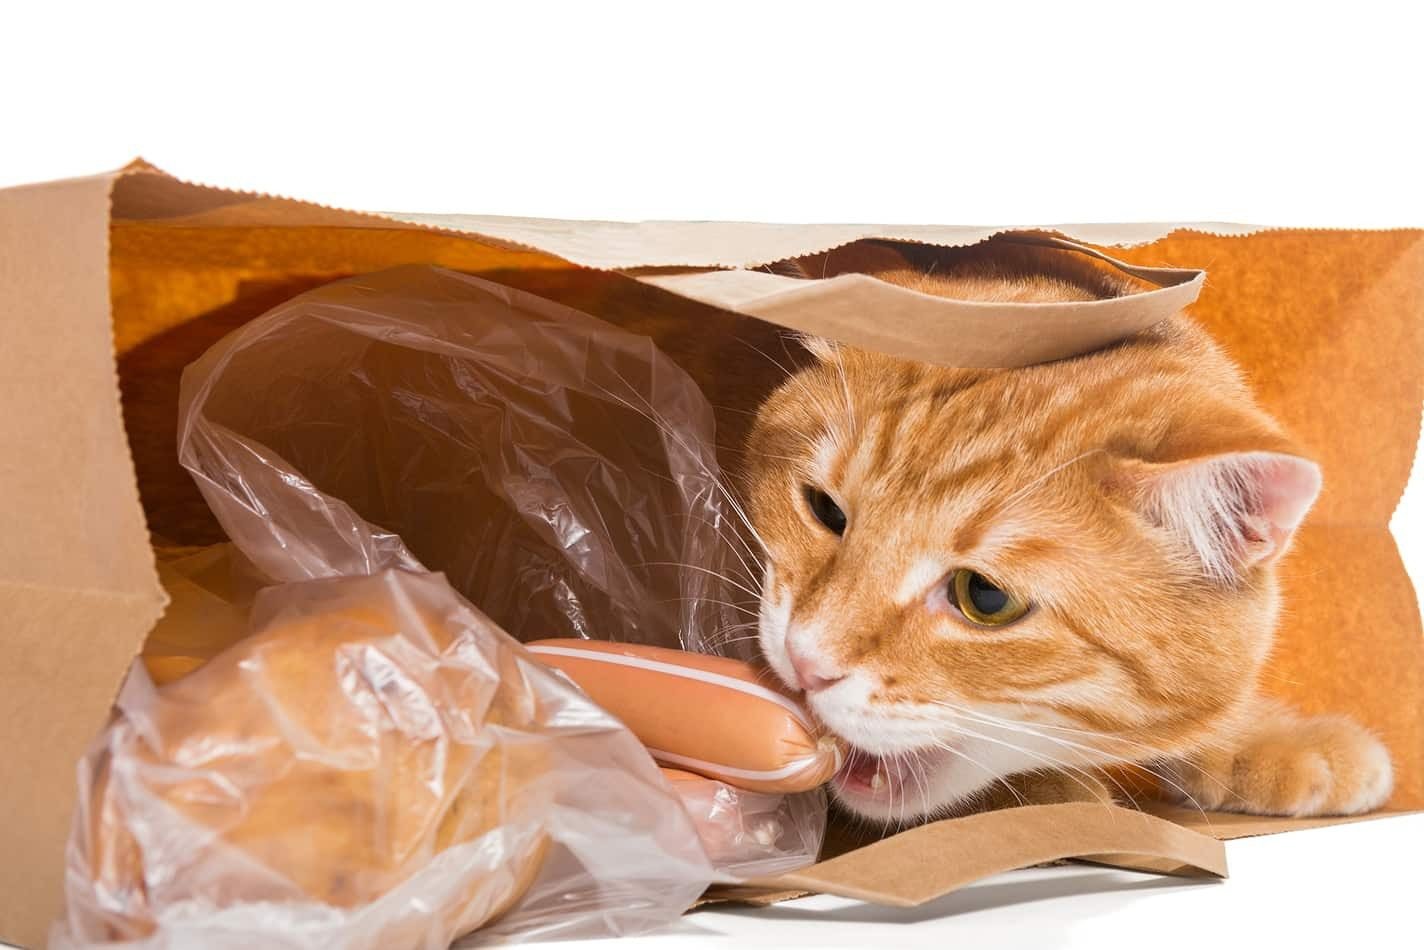 Prevention and Management of Plastic Chewing in cat